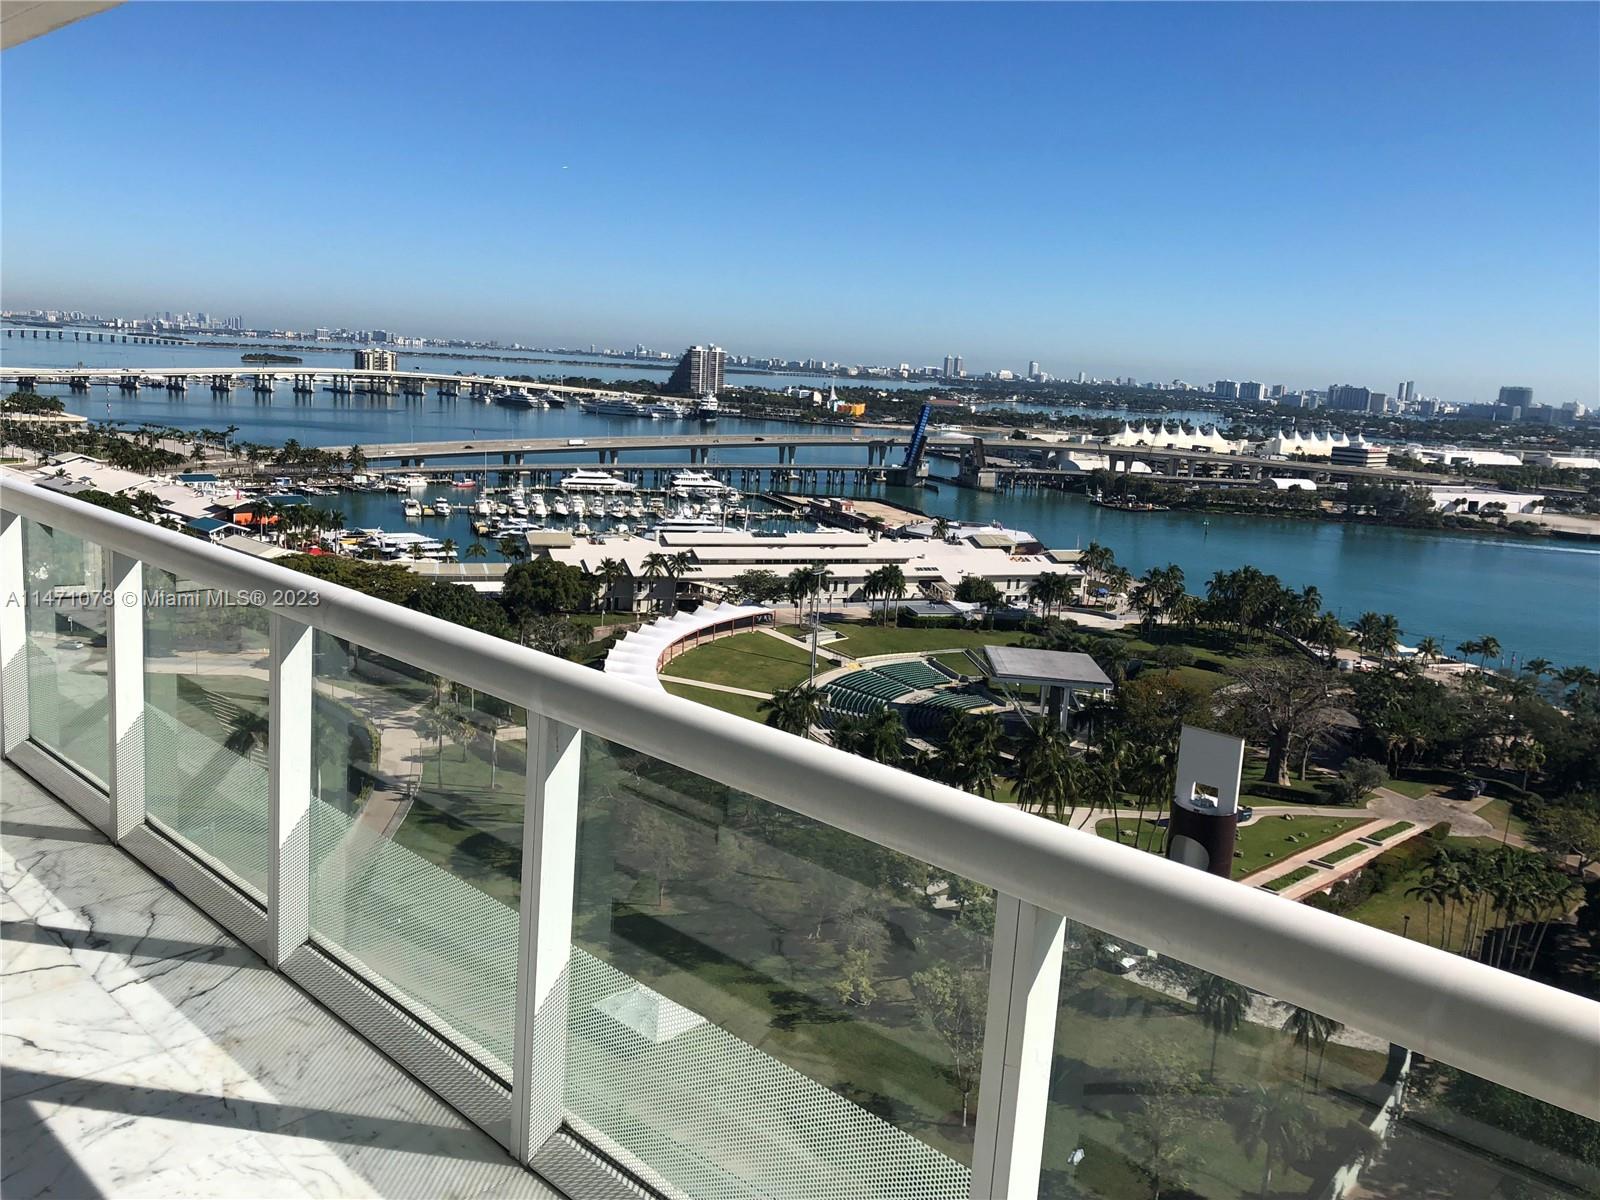 Best line in the building facing the North East view with marble floors. Live in Downtown Miami in this beautiful 3 bed 2 bath apartments on the 21st floor with spectacular views of the bay. Close to restaurants, Whole Foods and Metrorail.